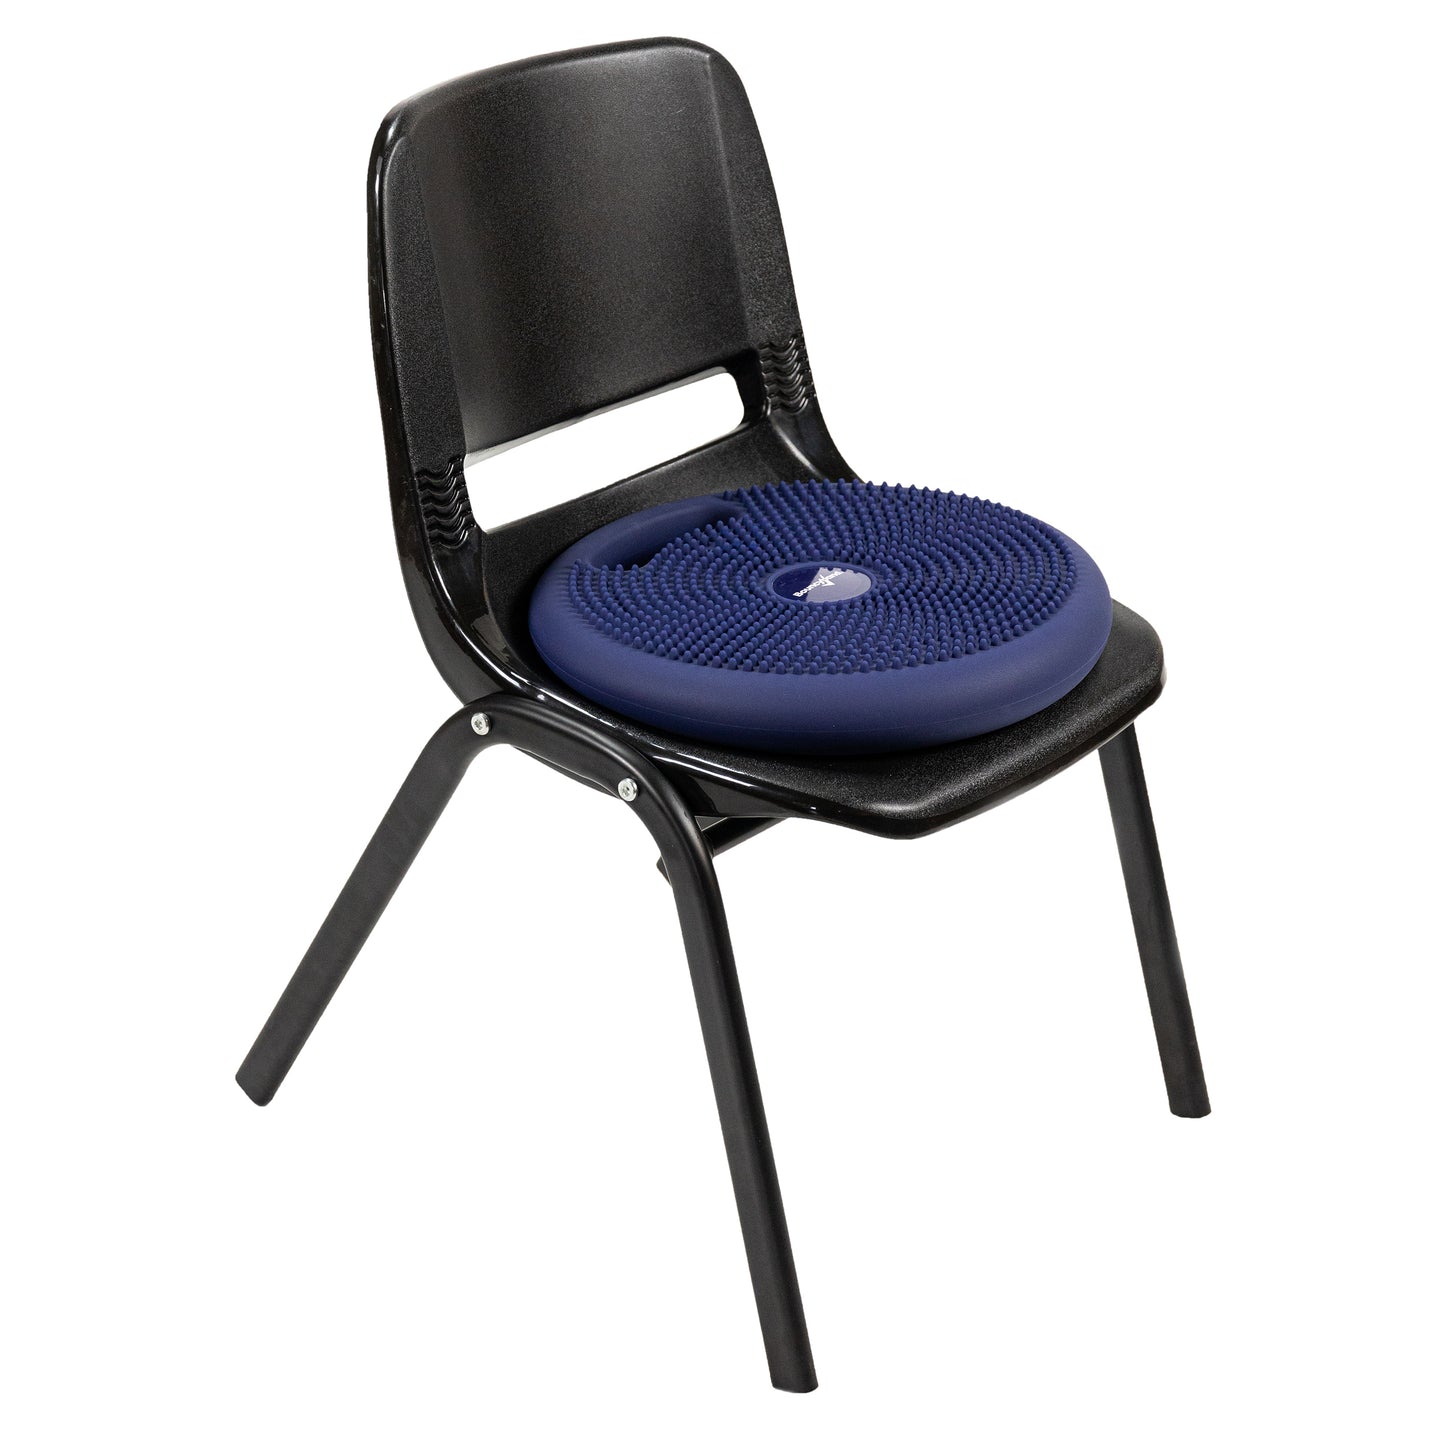 Wiggle Seat With Carry Handle Large Round Wedge Chair Cushion